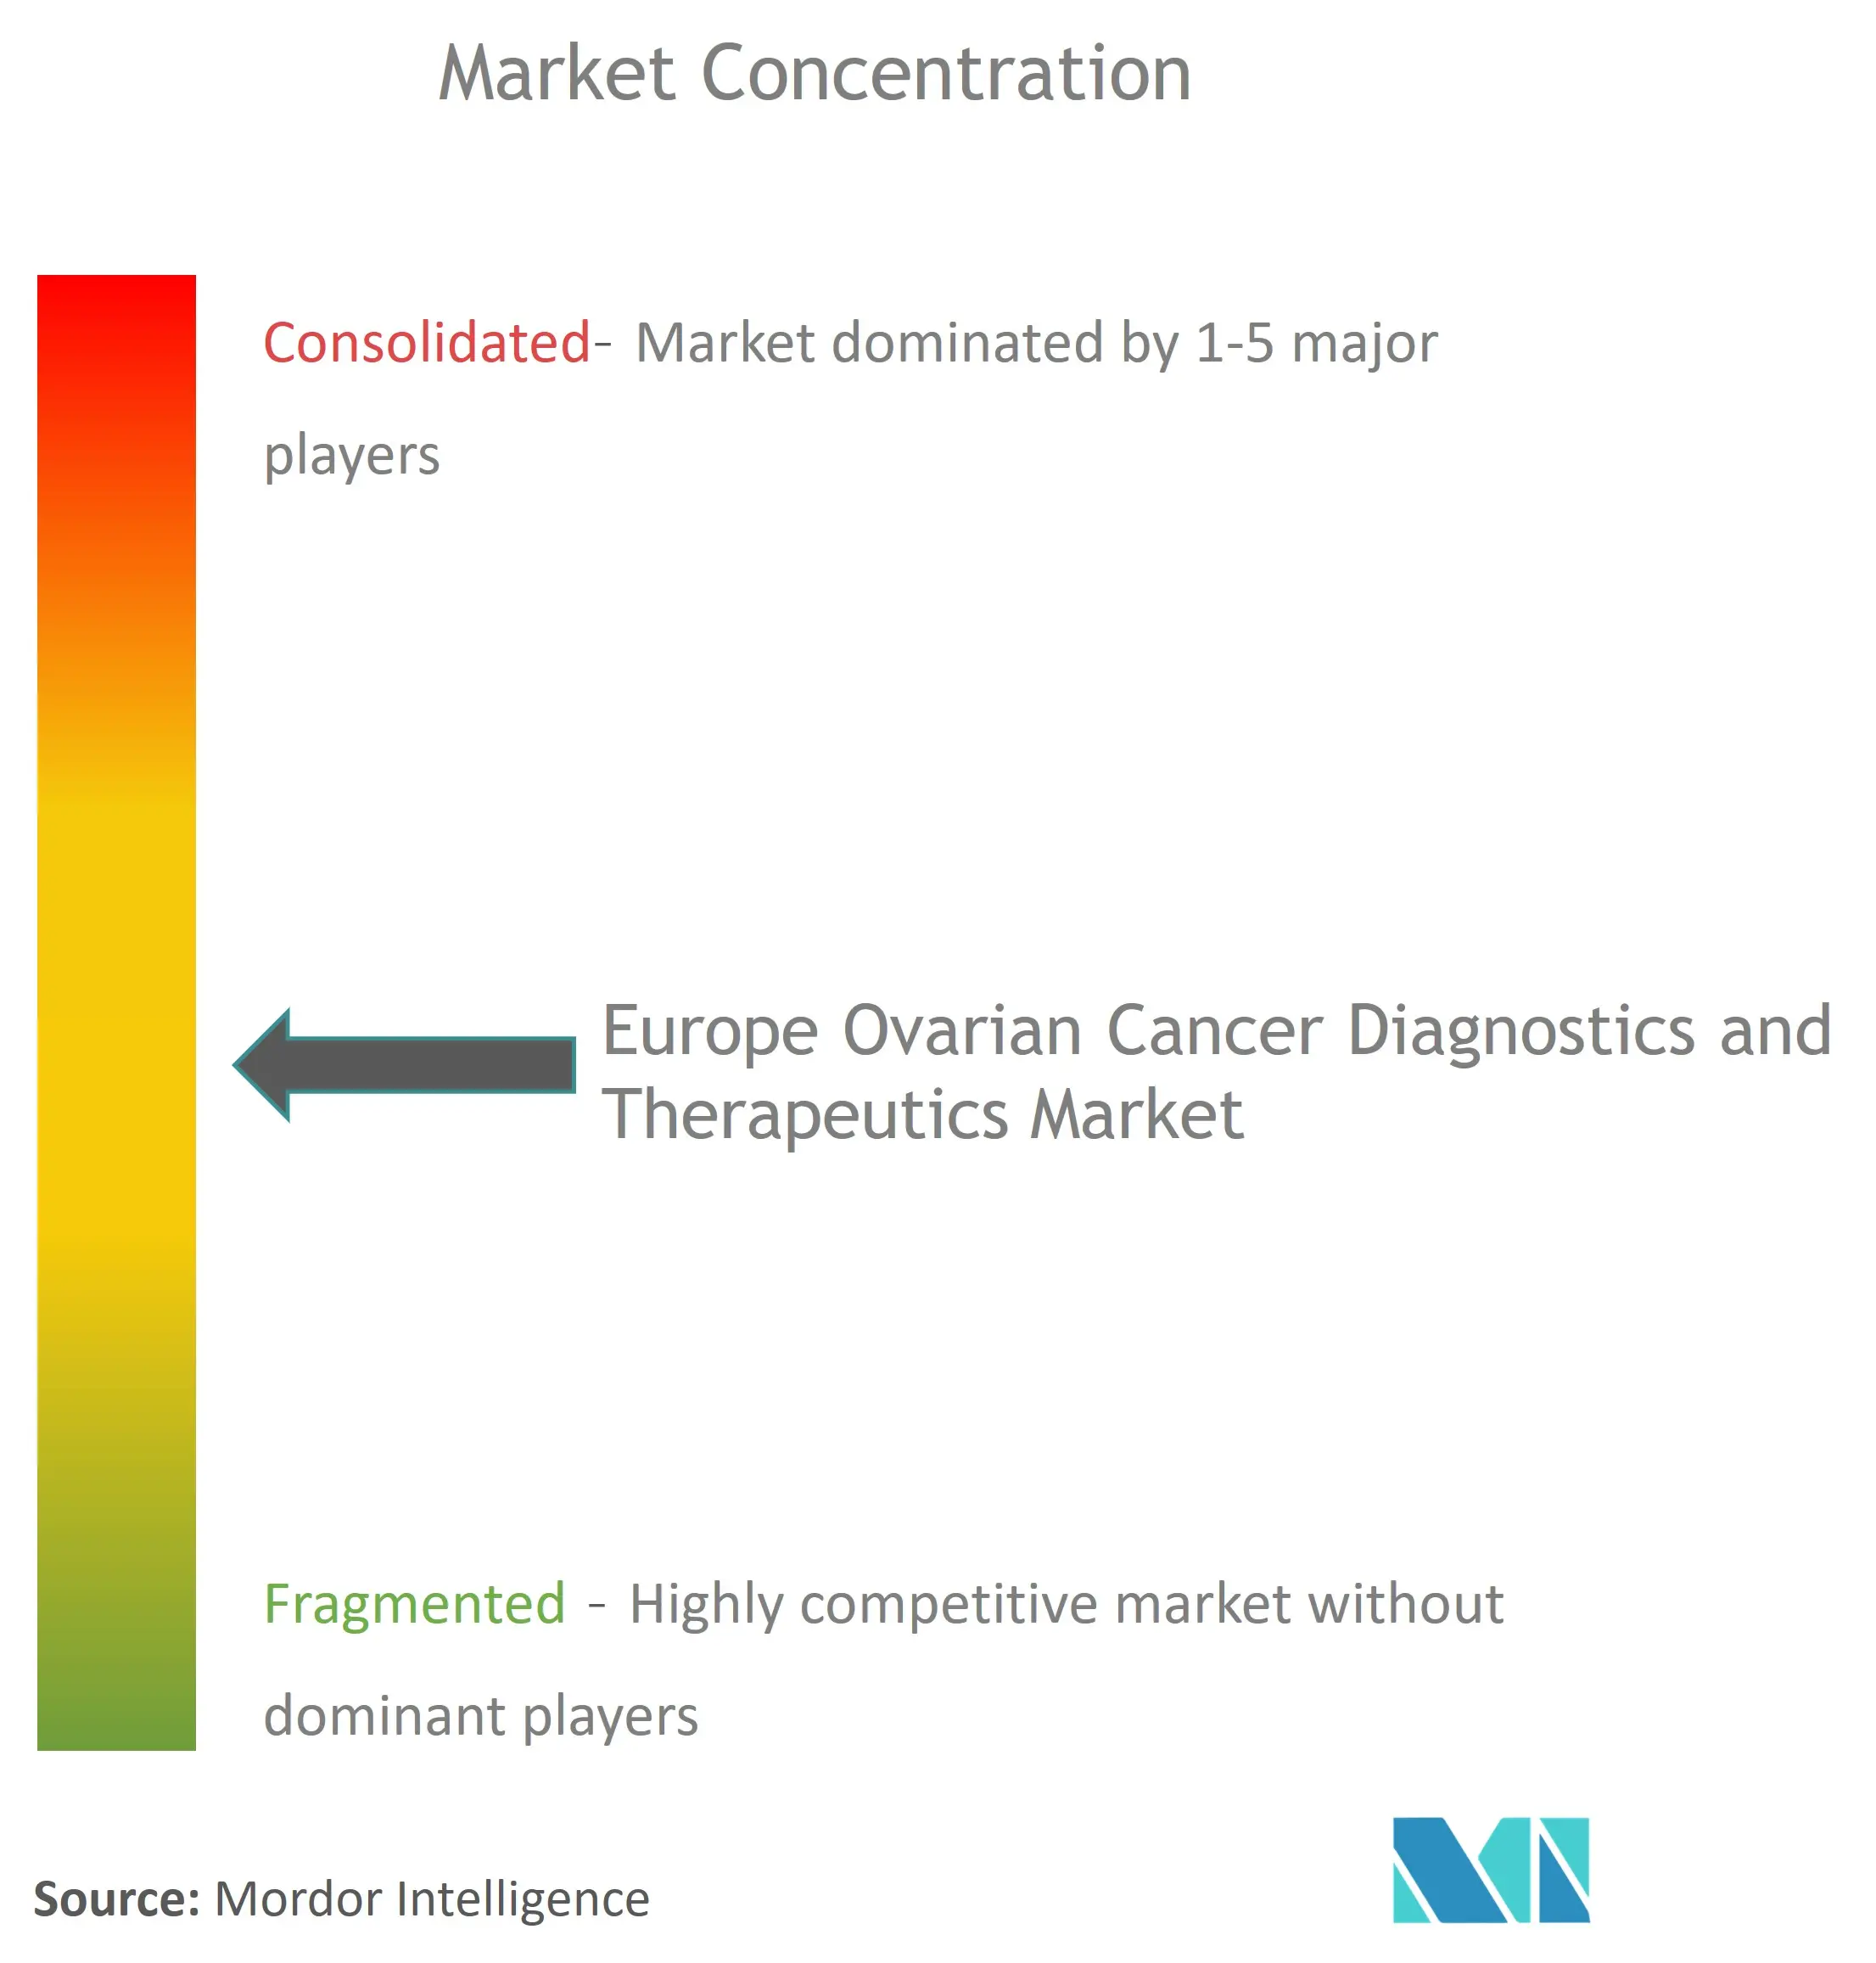 Europe Ovarian Cancer Diagnostics and Therapeutics Market Concentration